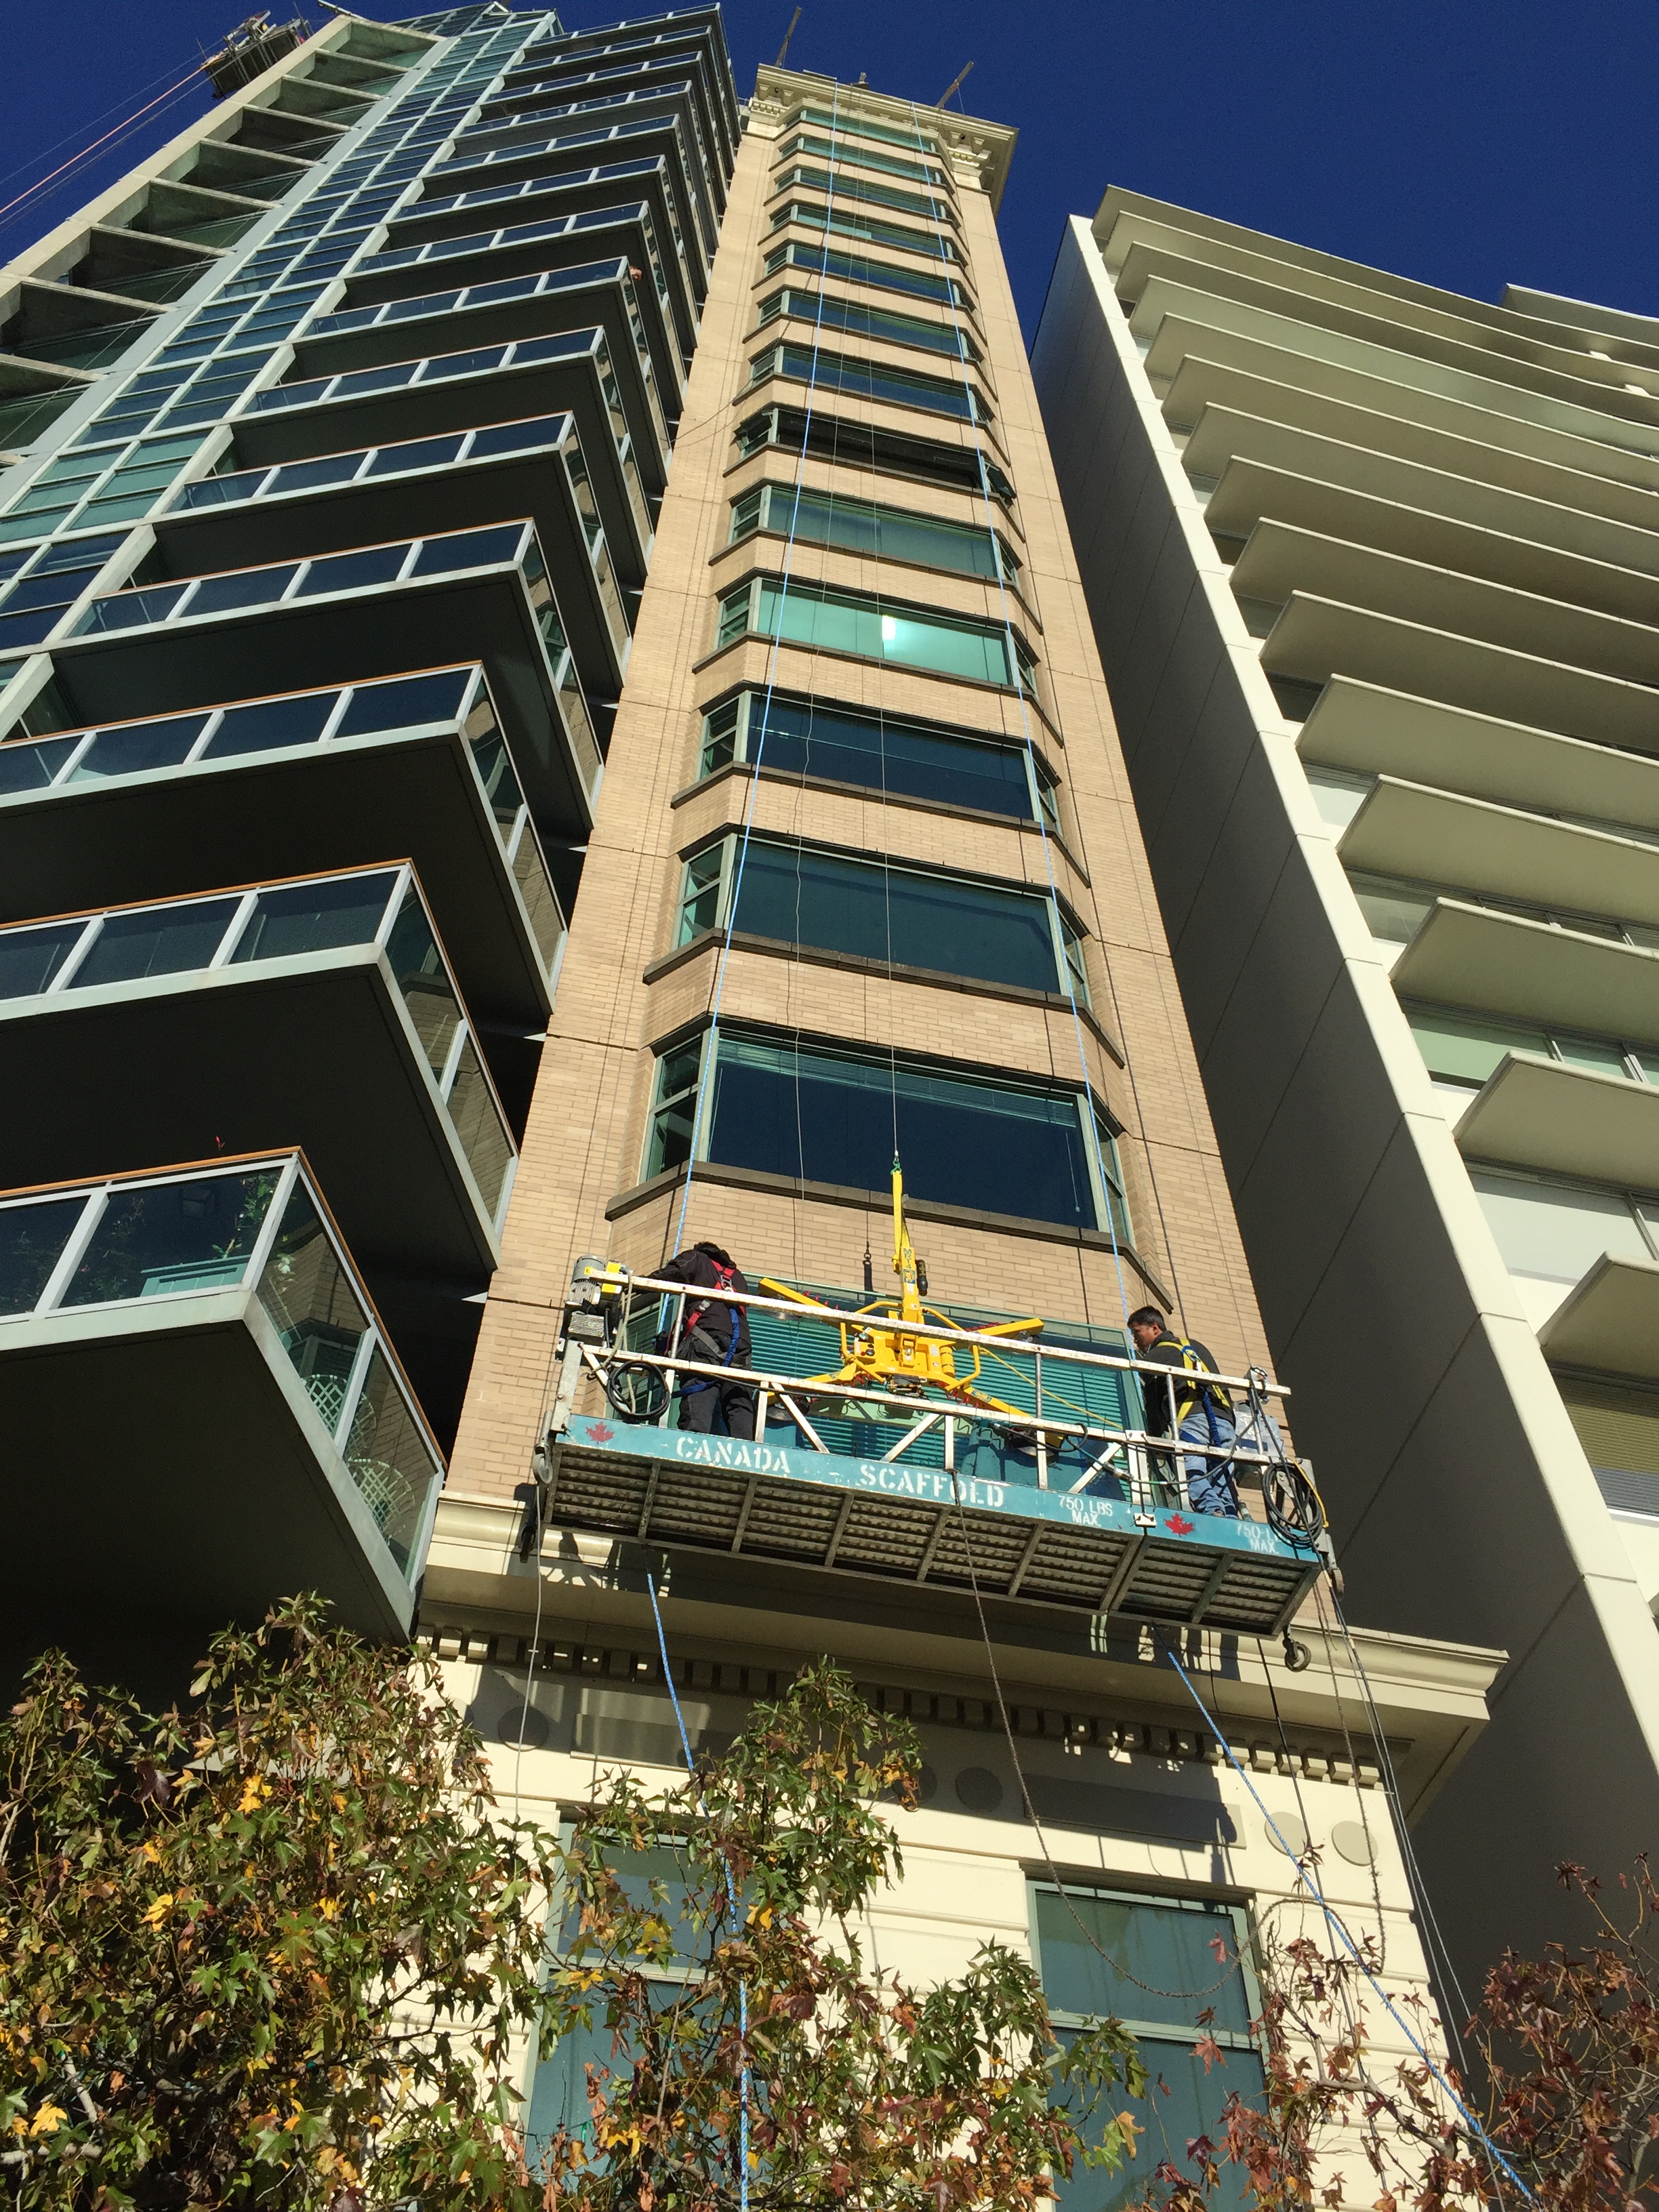 Window replacement for Downtown Vancouver Hi-rise apartment condo building